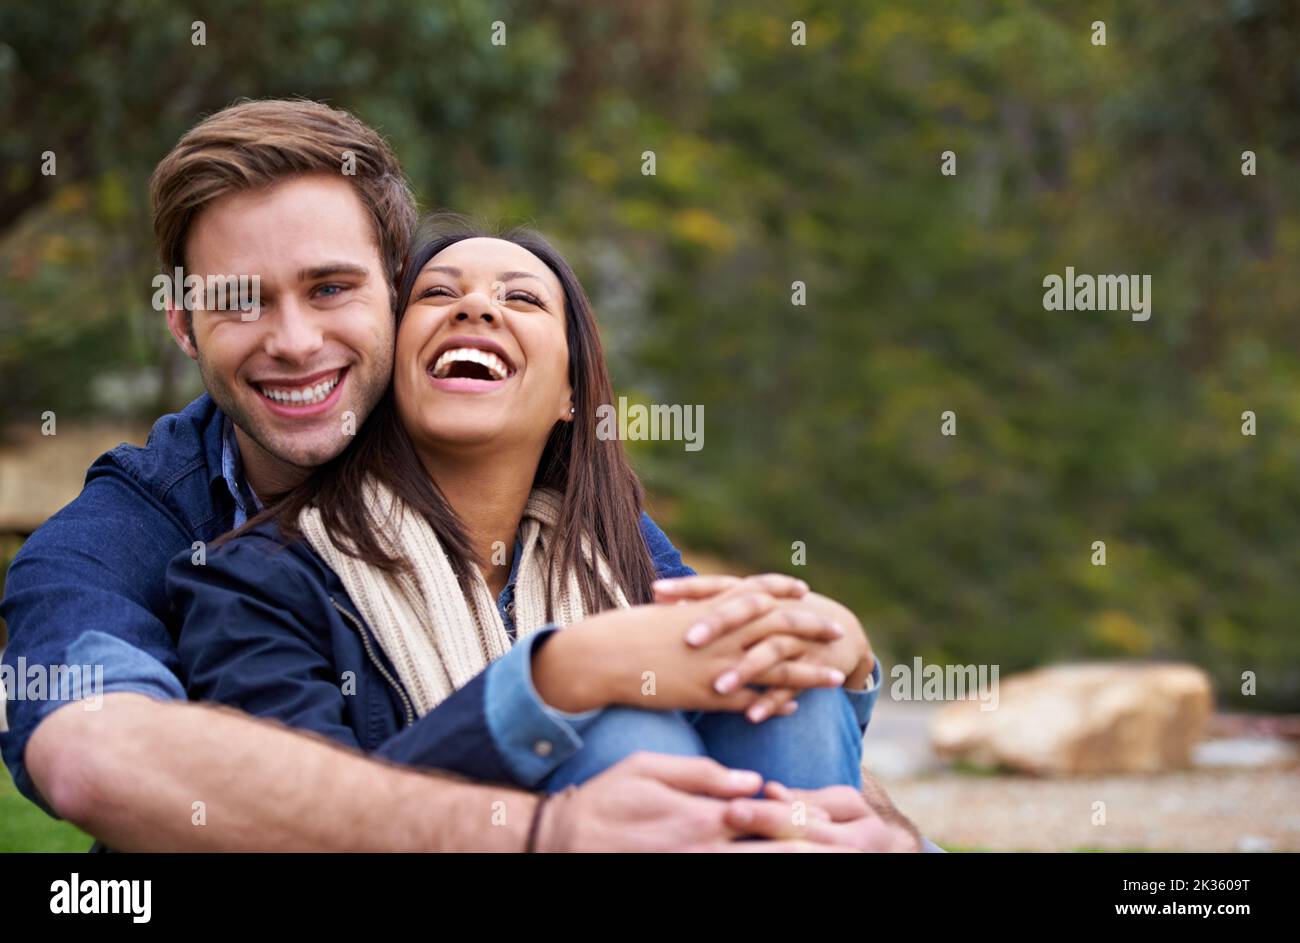 I just love your sense of humour. a good-looking young couple enjoying an affectionate moment outdoors. Stock Photo